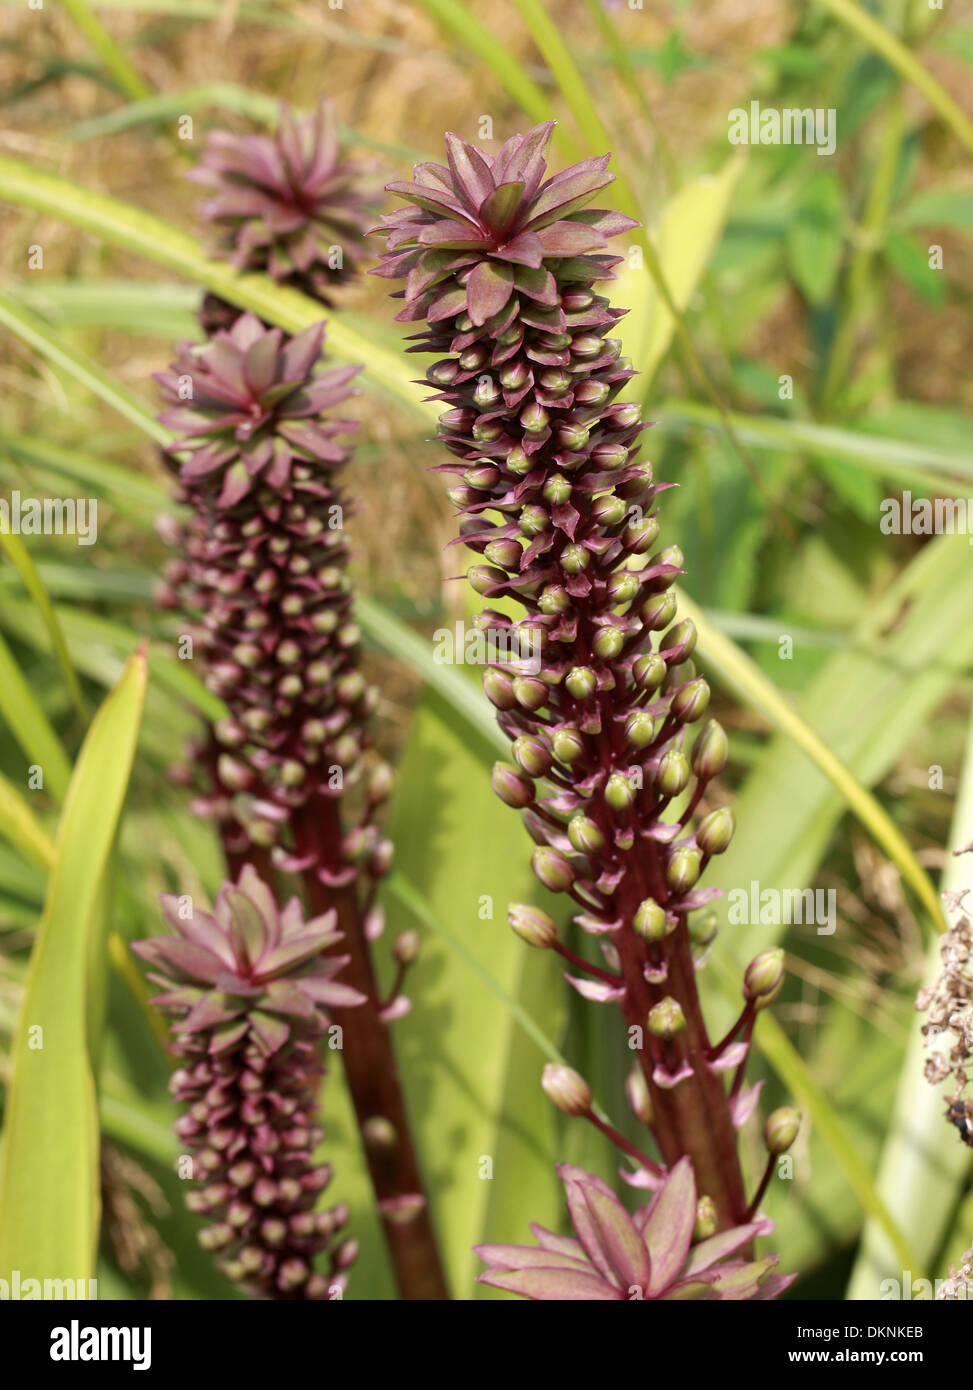 Pineapple Lily, Eucomis comosa, syn E. punctata, Hyacinthaceae, South Africa Stock Photo